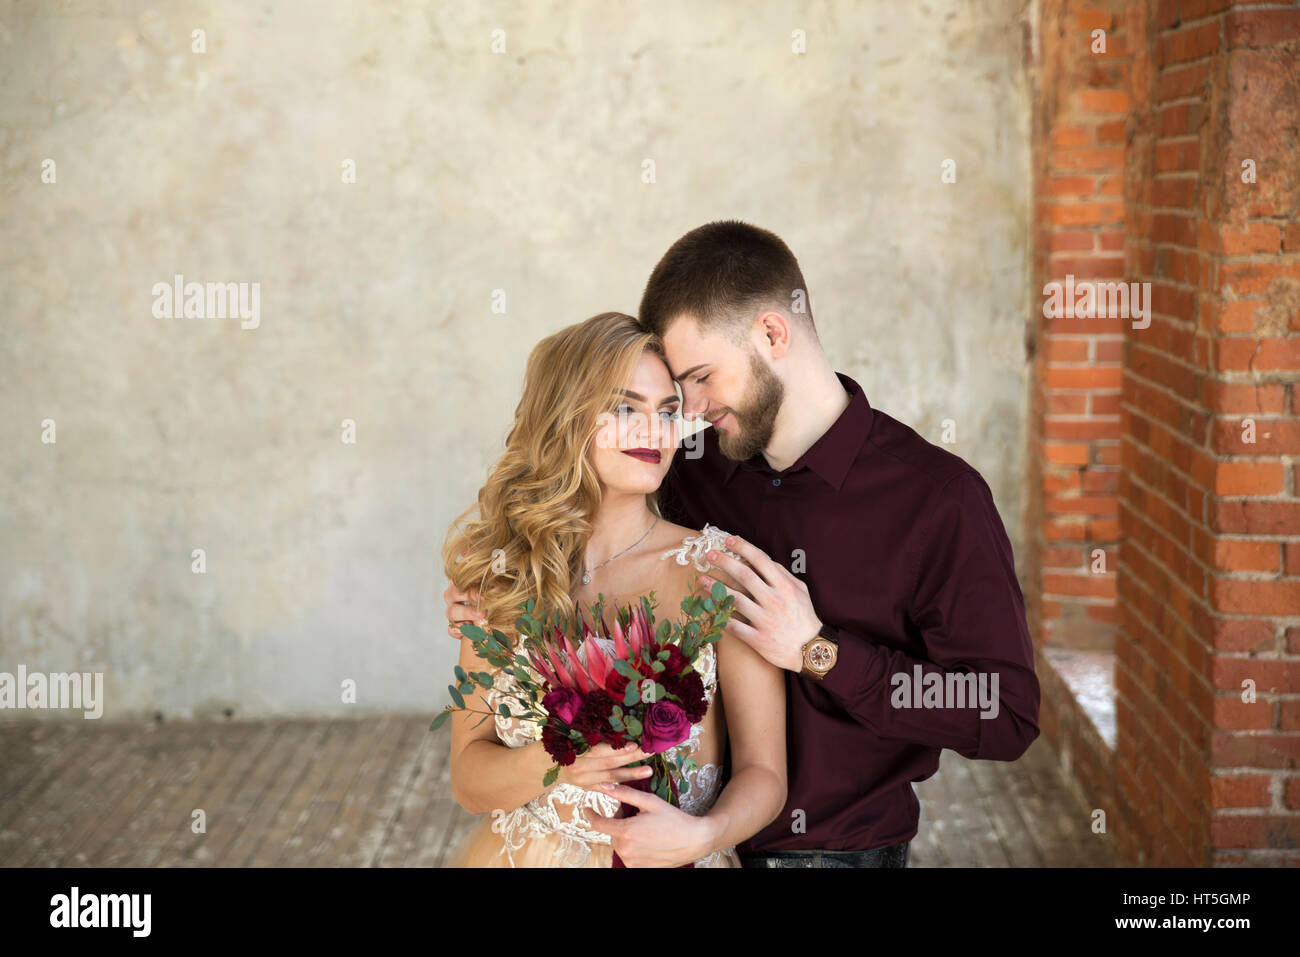 Bride and groom pose at wedding ceremony Stock Photo